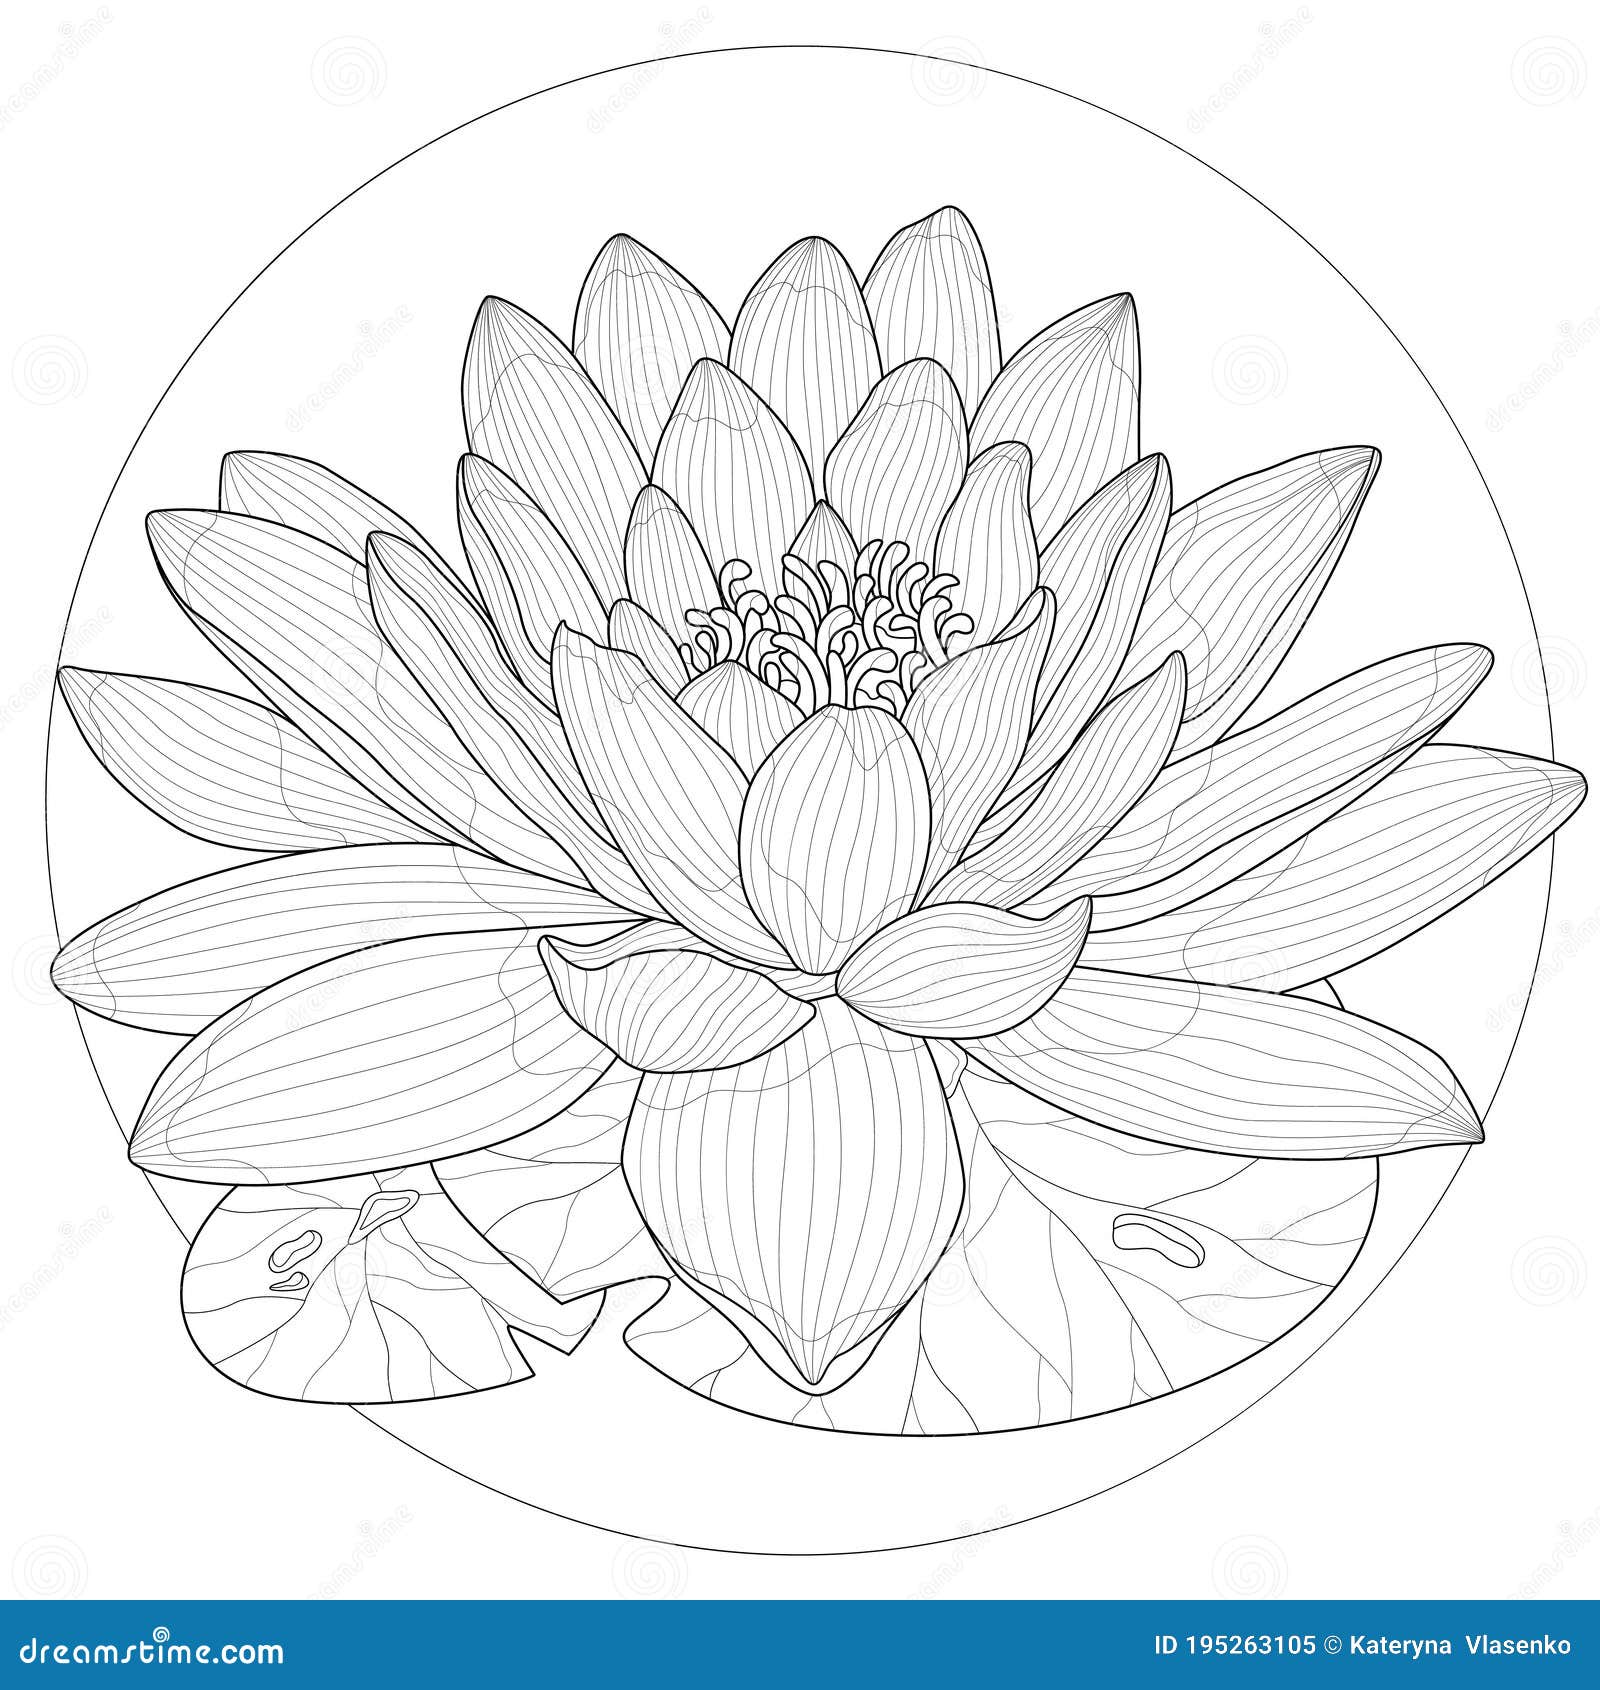 Lotus flowercoloring book antistress for children and adults stock illustration